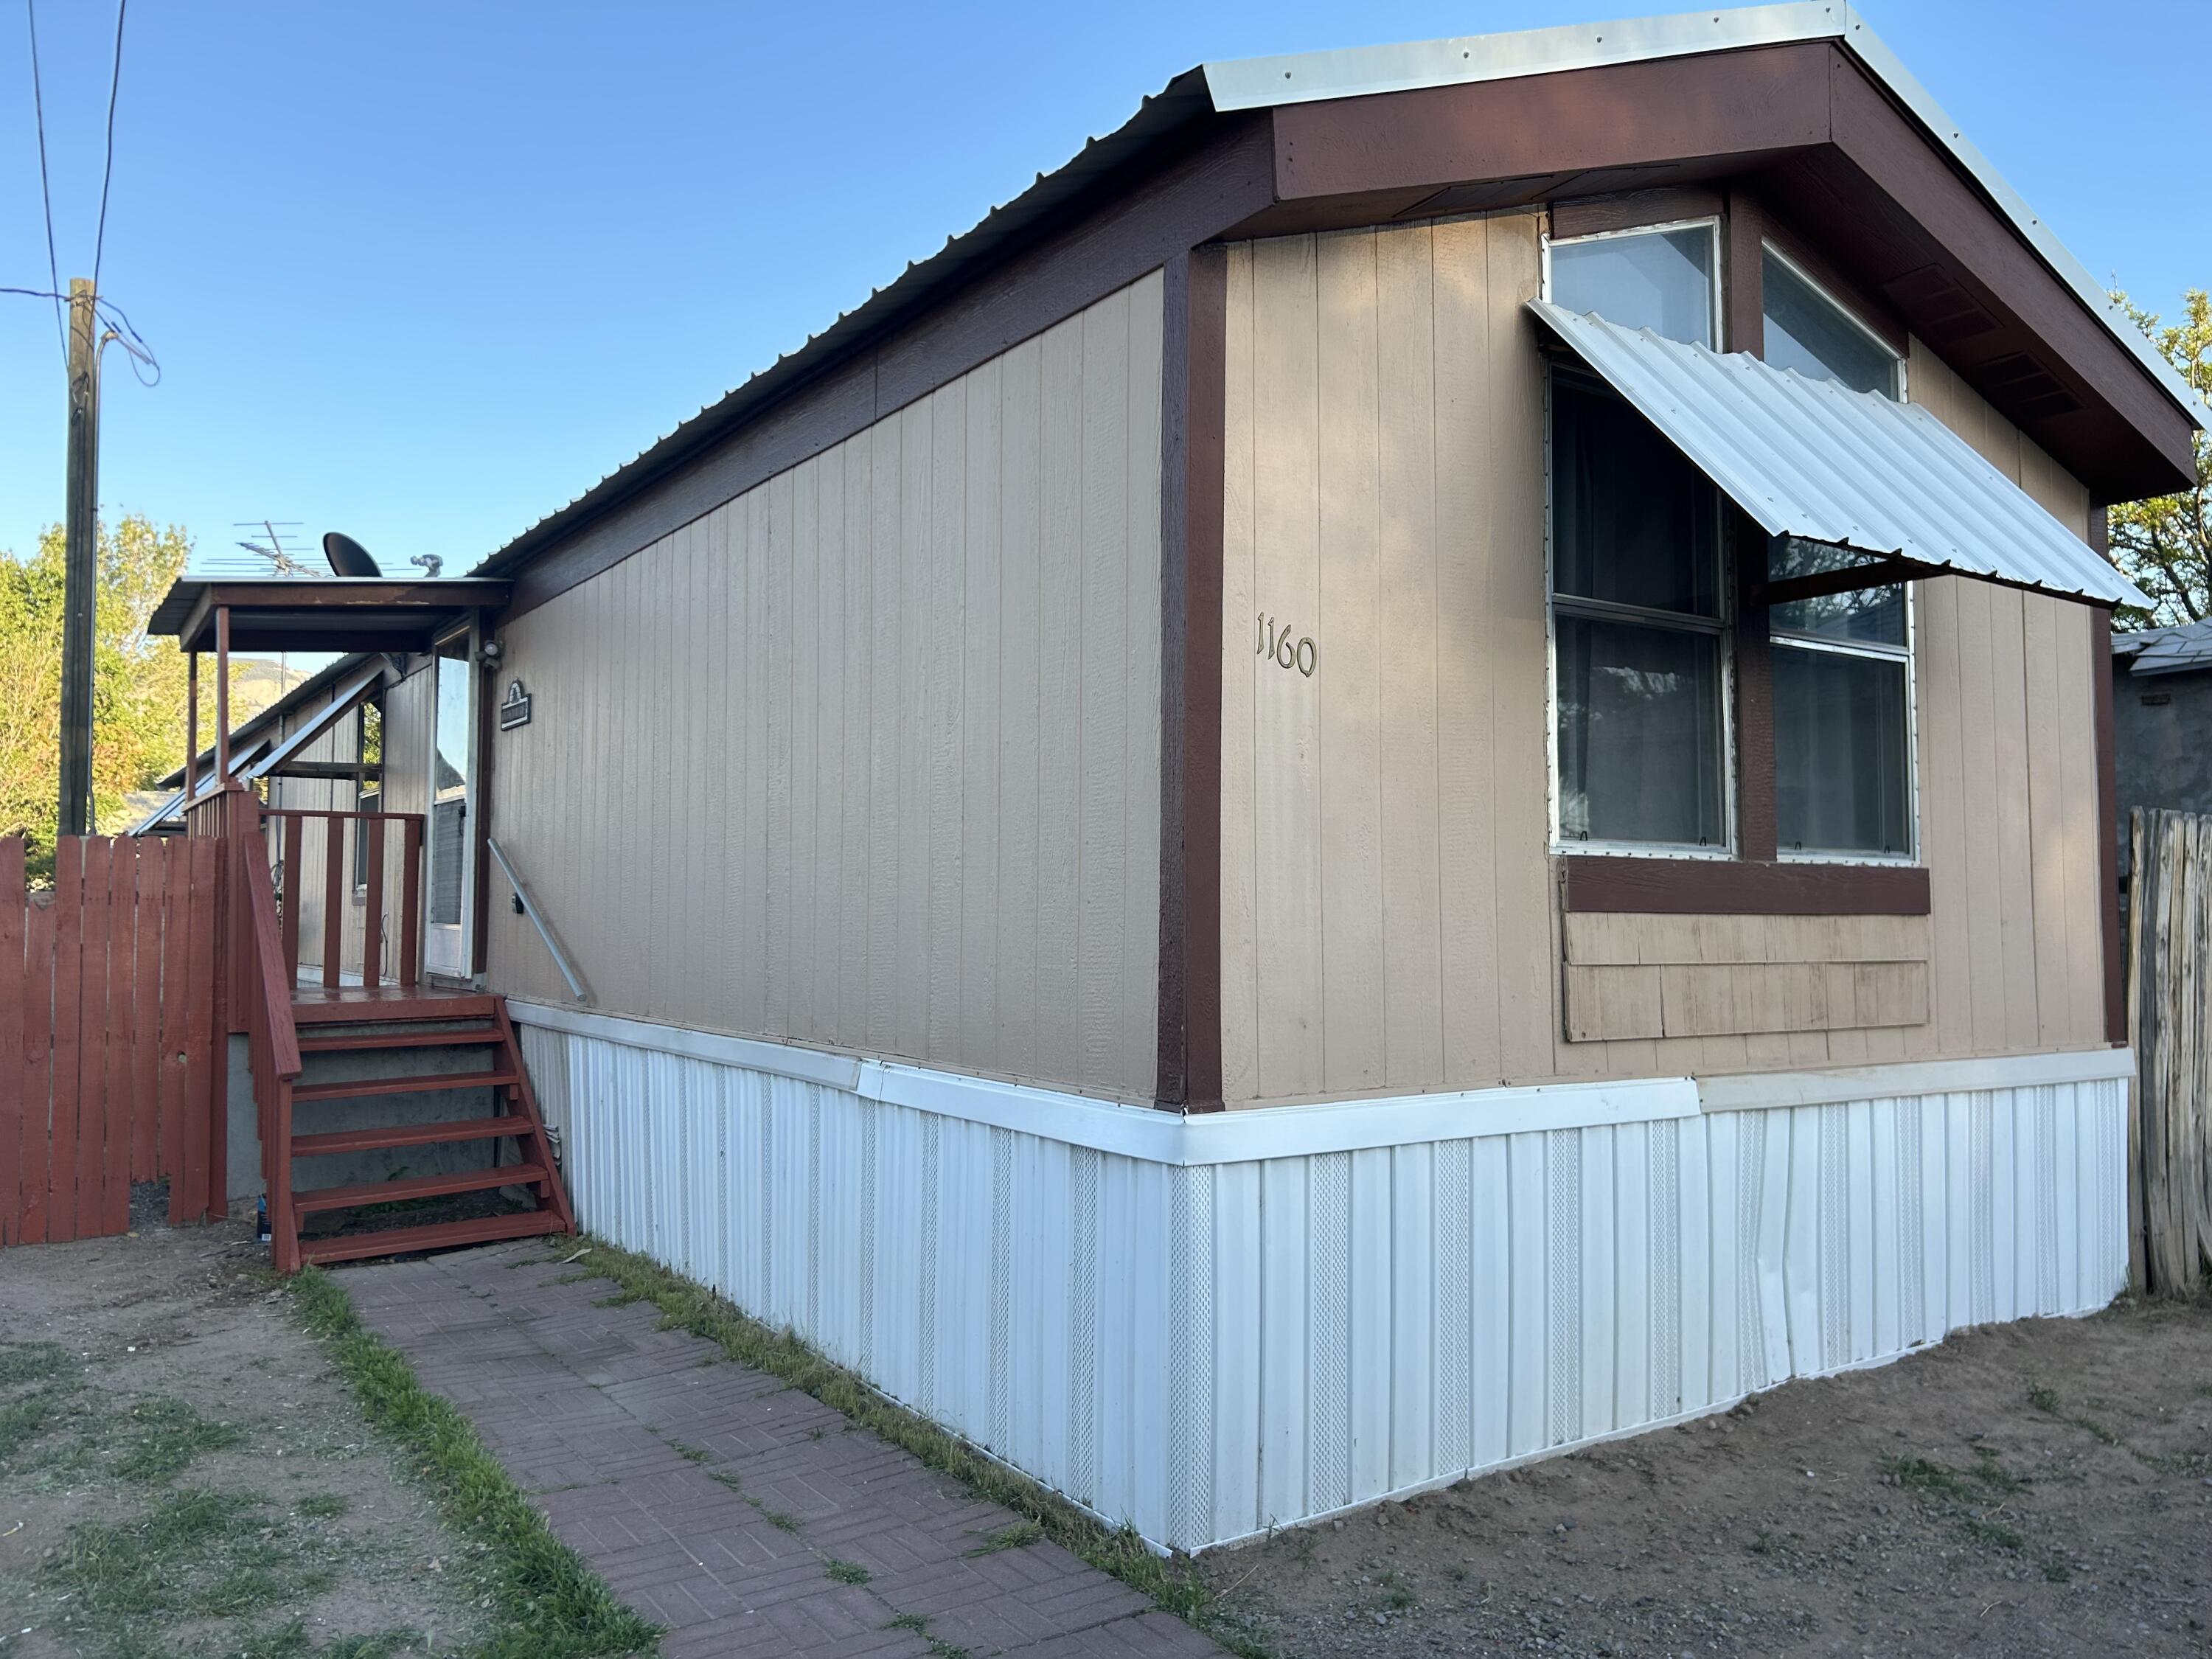 Conveniently located in the heart of Bernalillo! Within walking distance to Downtown and parks.  Beautiful views, open floor plan, large kitchen are just some of the features of this charming home.